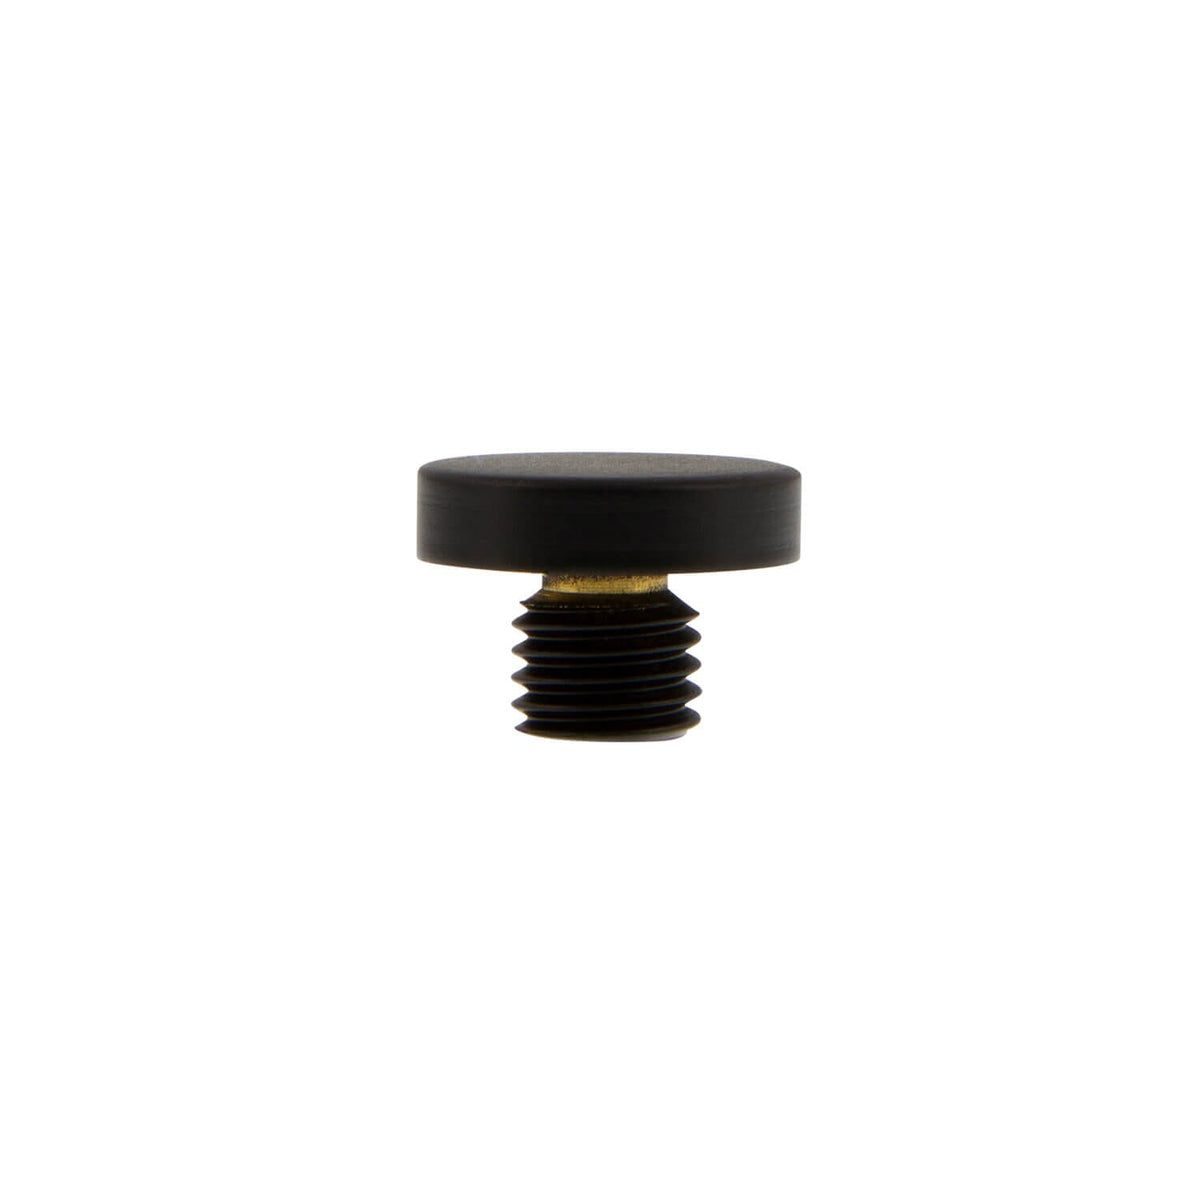 3.3mm Button Finial in Satin Black